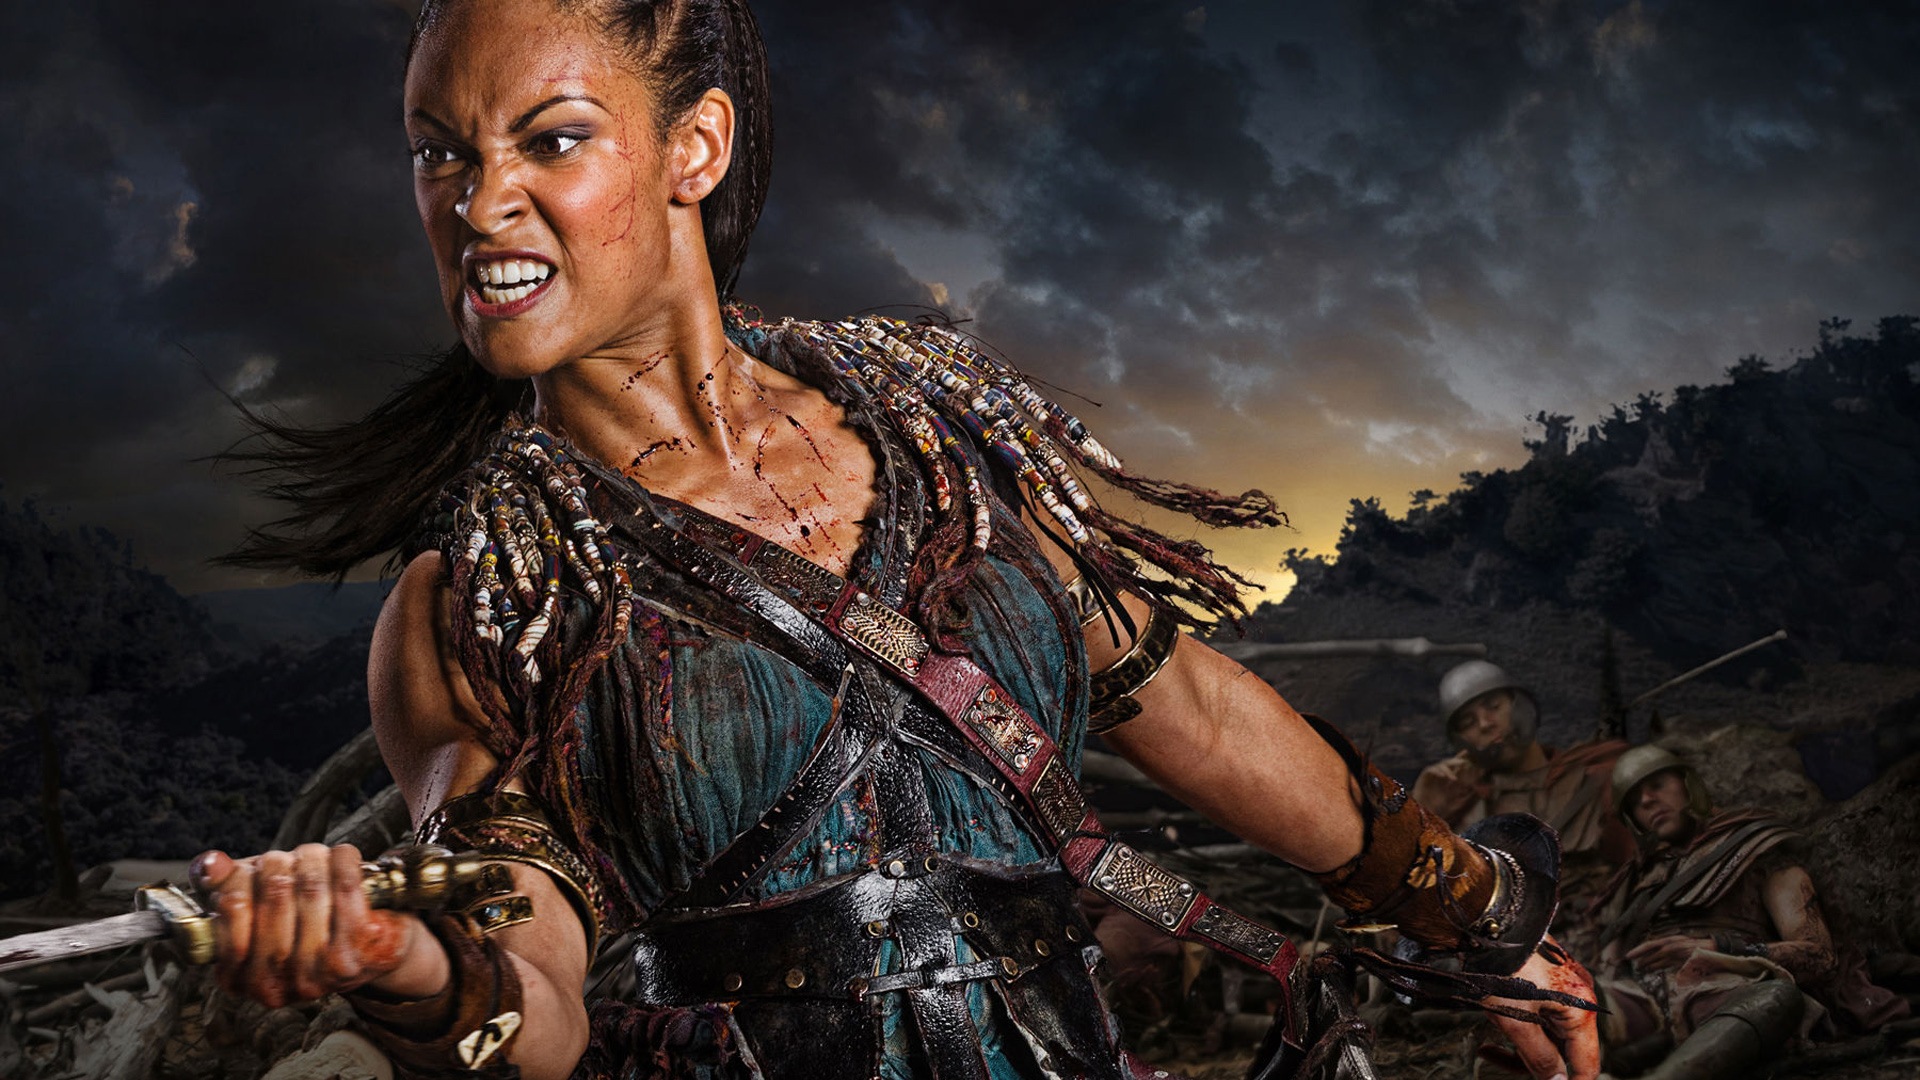 Spartacus: War of the Damned HD Wallpaper #14 - 1920x1080